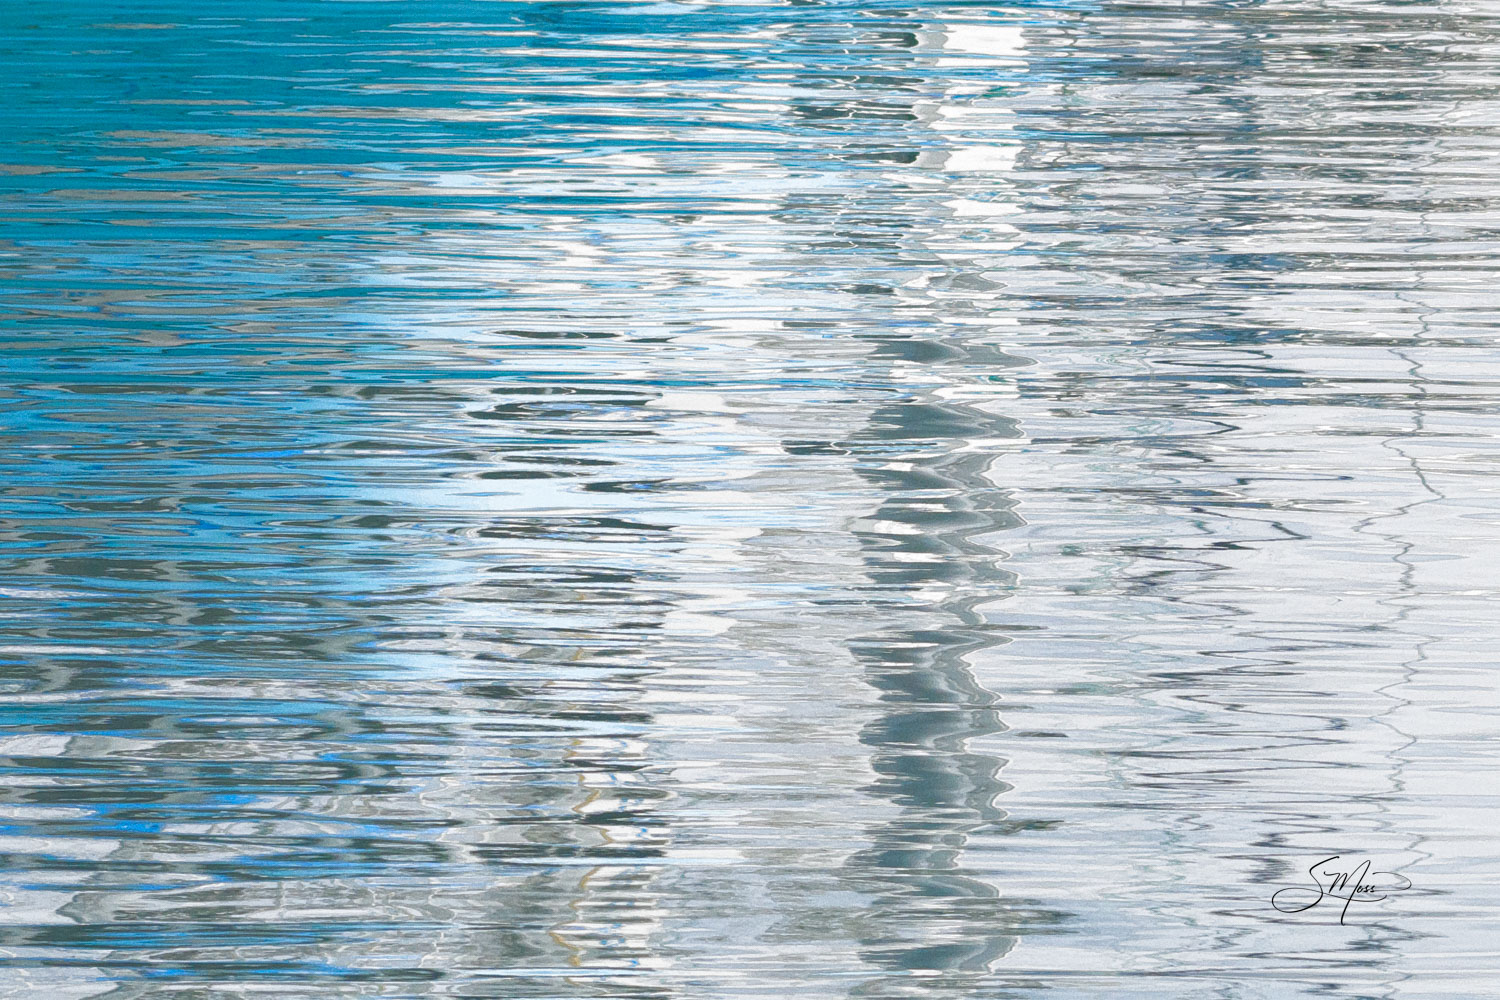 abstract, color, horizontal, fine art, reflections, ripples, boats, water reflection, solitude, modern, contemporary, ferry...